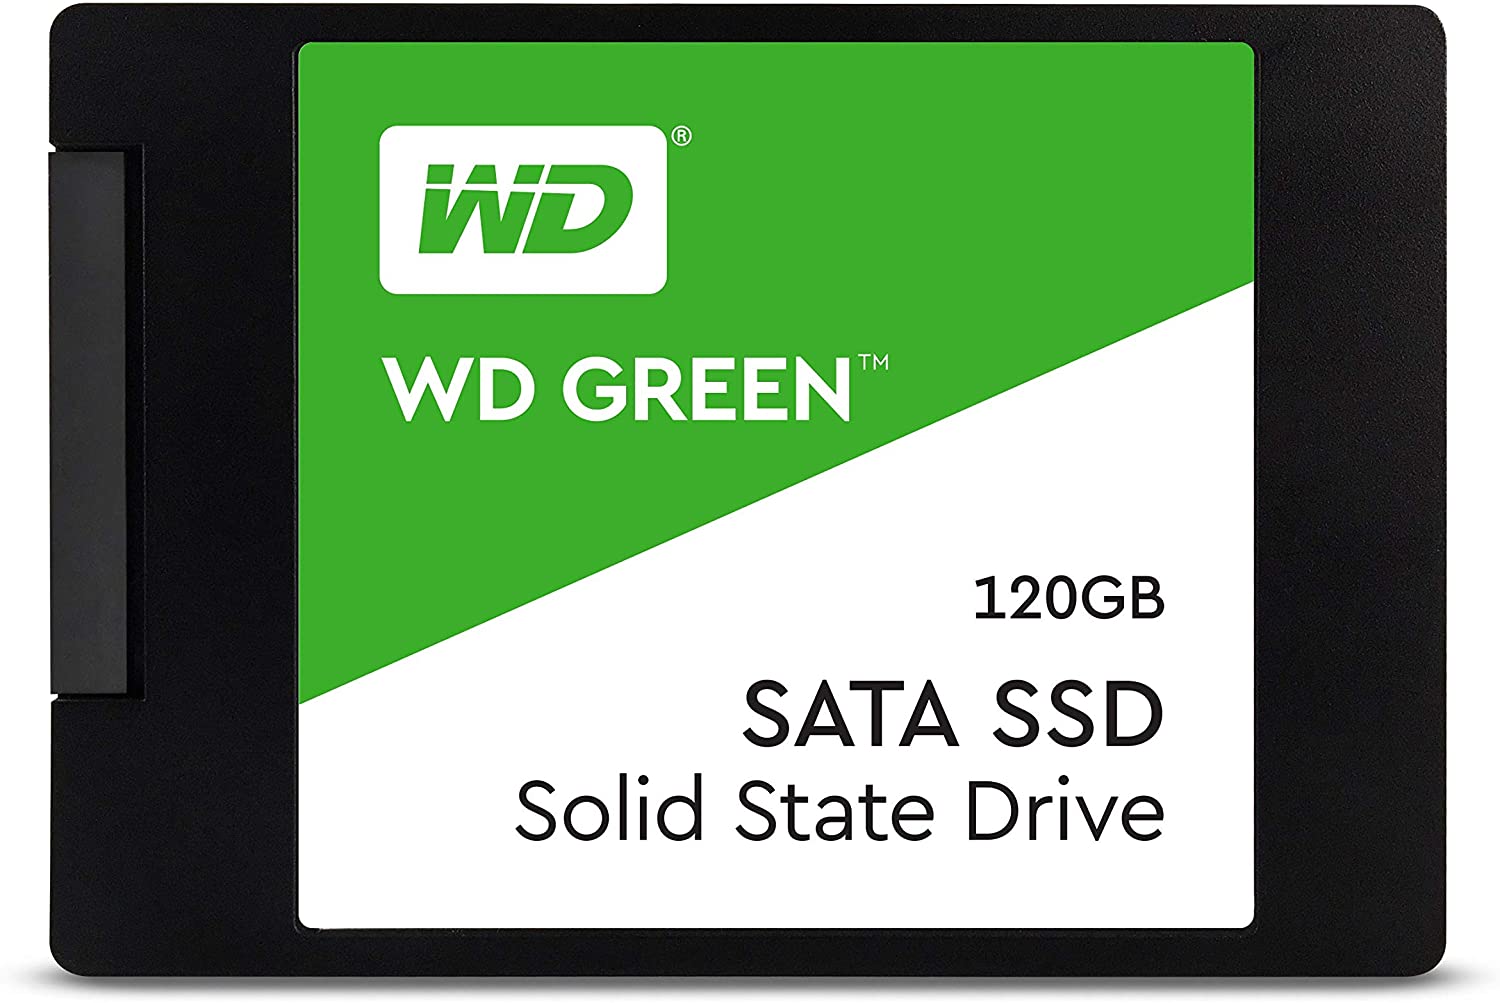 WD Green PC SSD - WINPROMY CONSULTANCY SDN BHD. (1065242-V) All Rights Reserved.